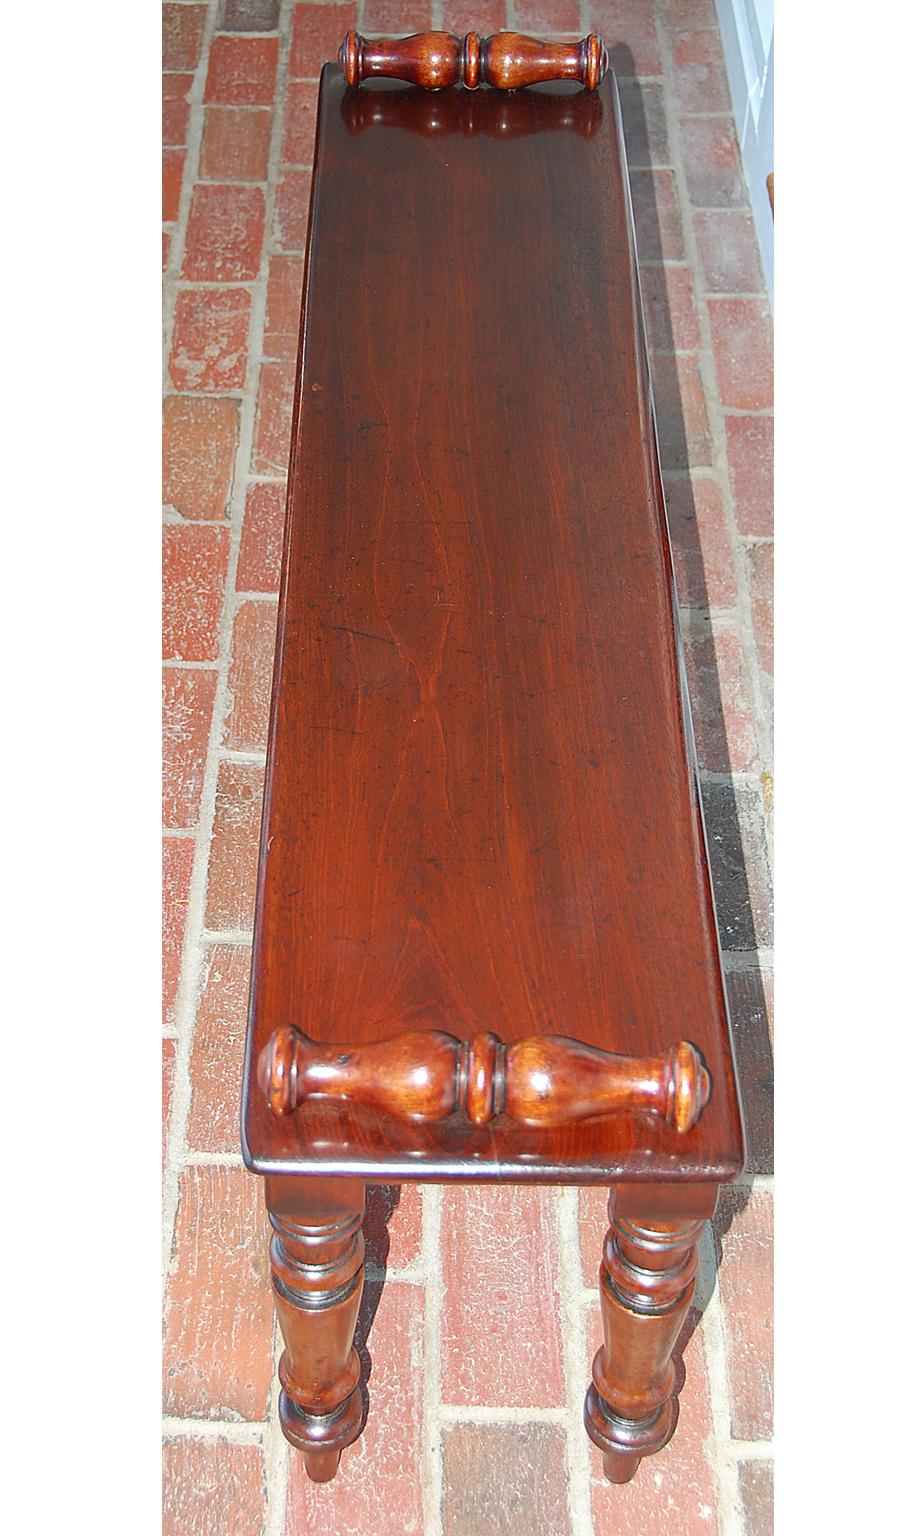 English 19th century period mahogany hall bench four feet long with turned legs and roll ends, 47 Inches long and 11